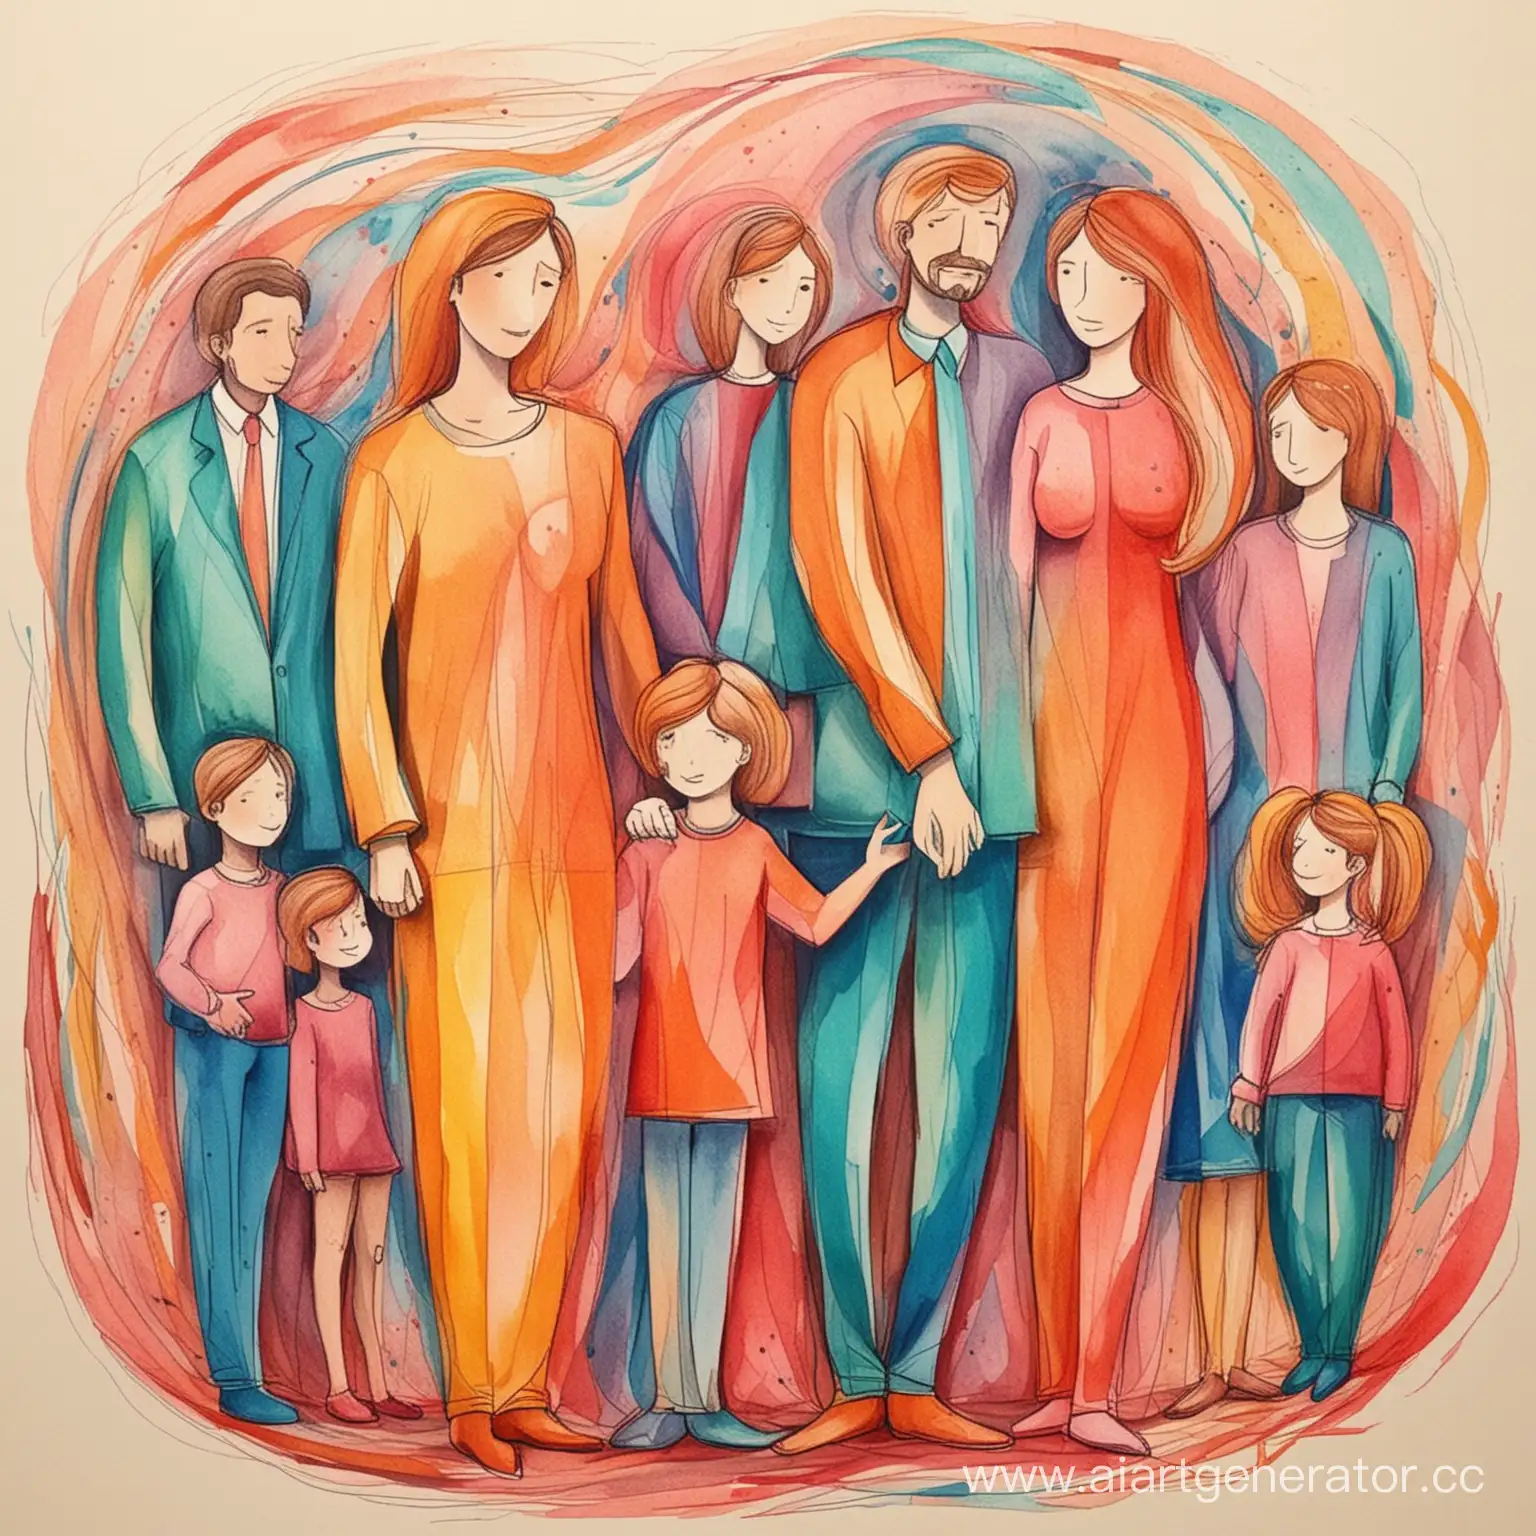 Colorful-Abstraction-Joyful-Gathering-of-Families-in-Artistic-Illustration